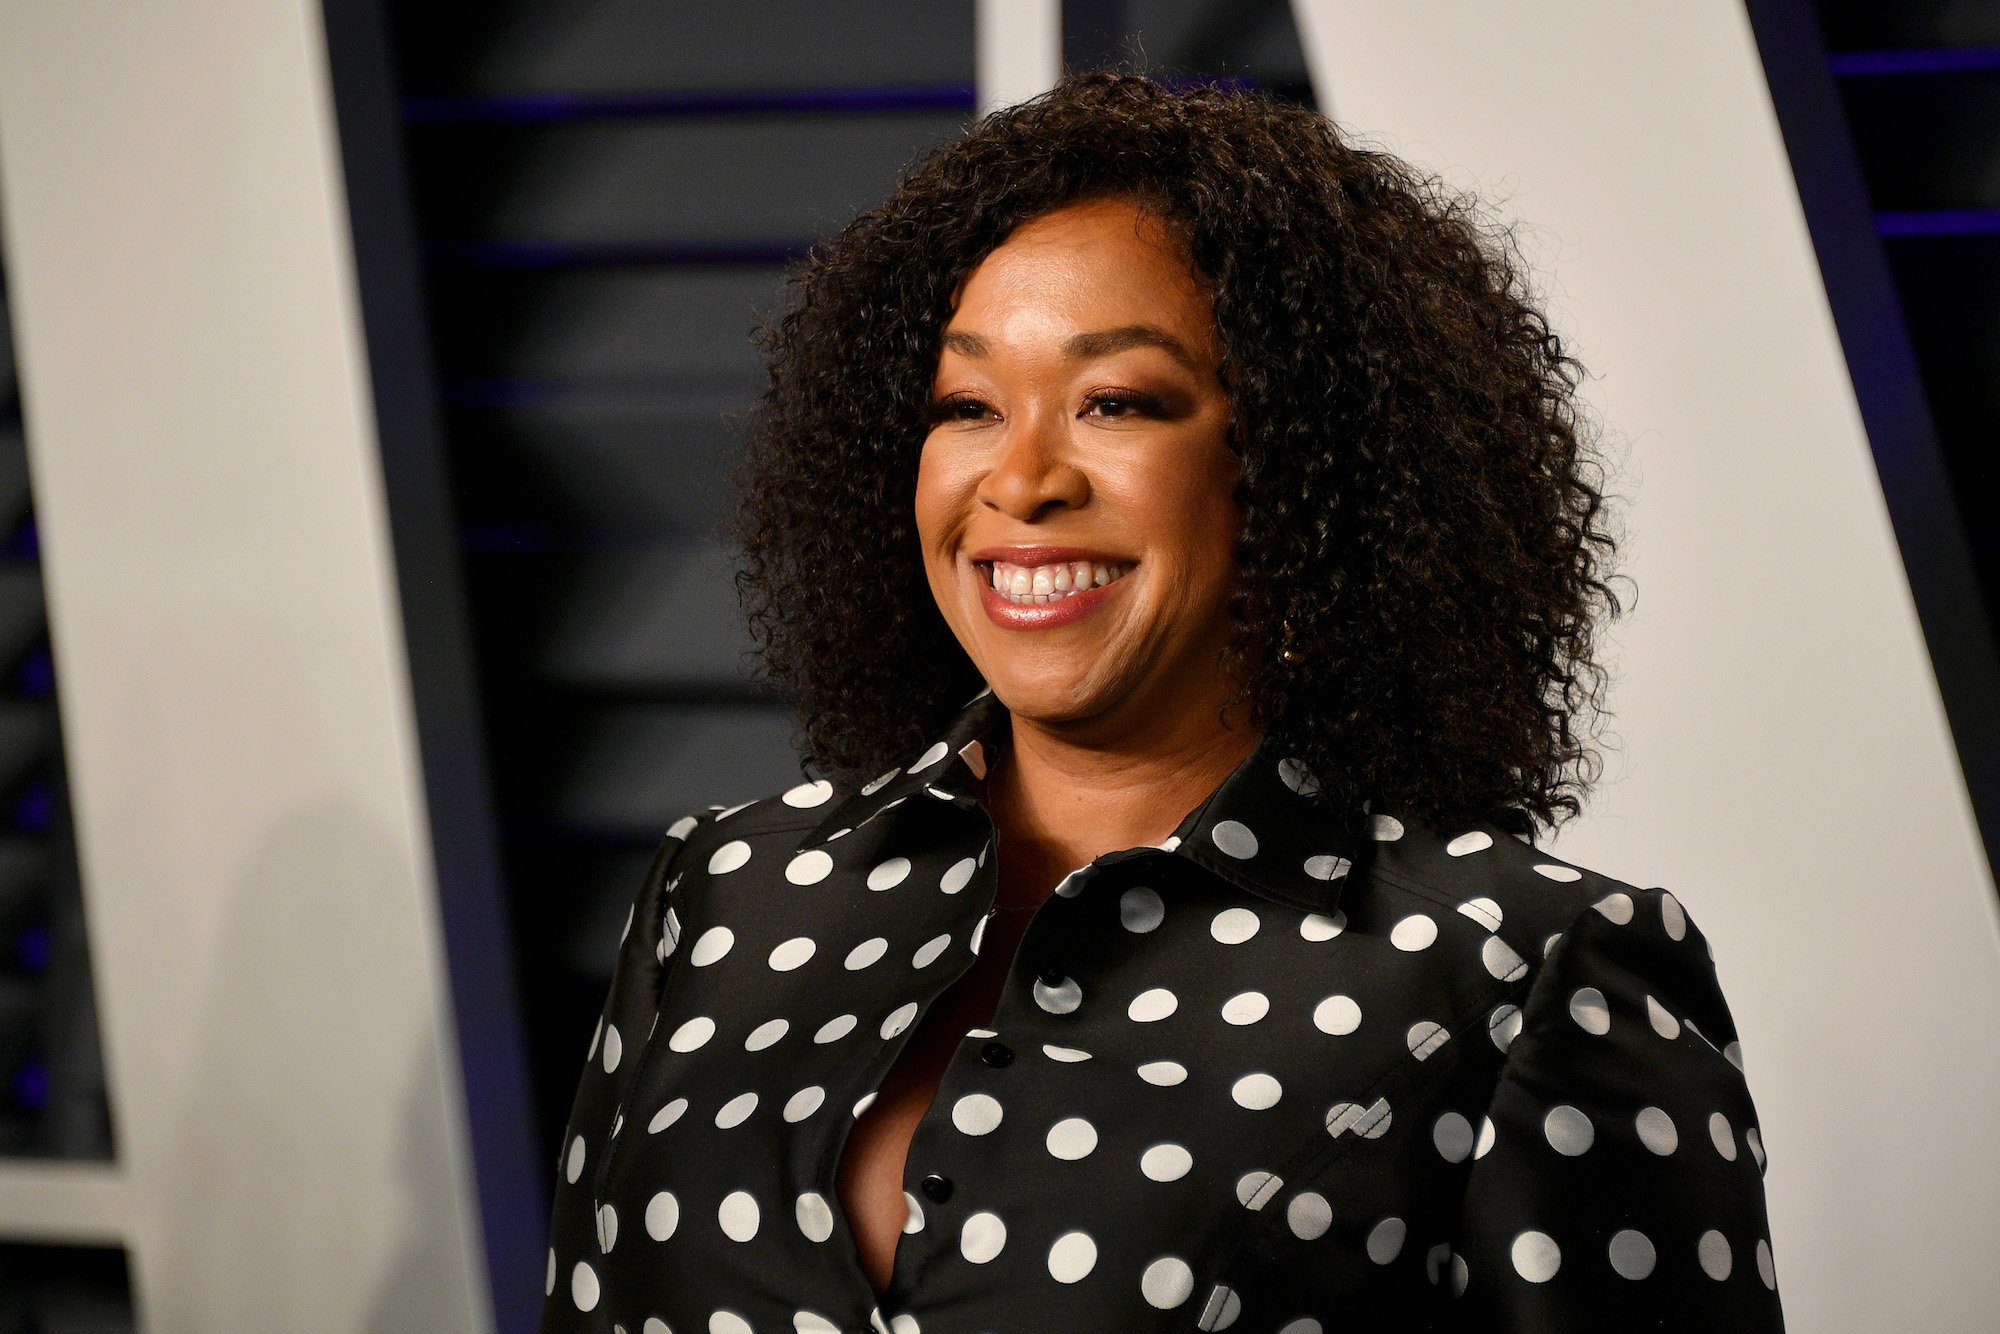 Shonda Rhimes wearing a black and white dress to the 2019 Vanity Fair Oscar Party.